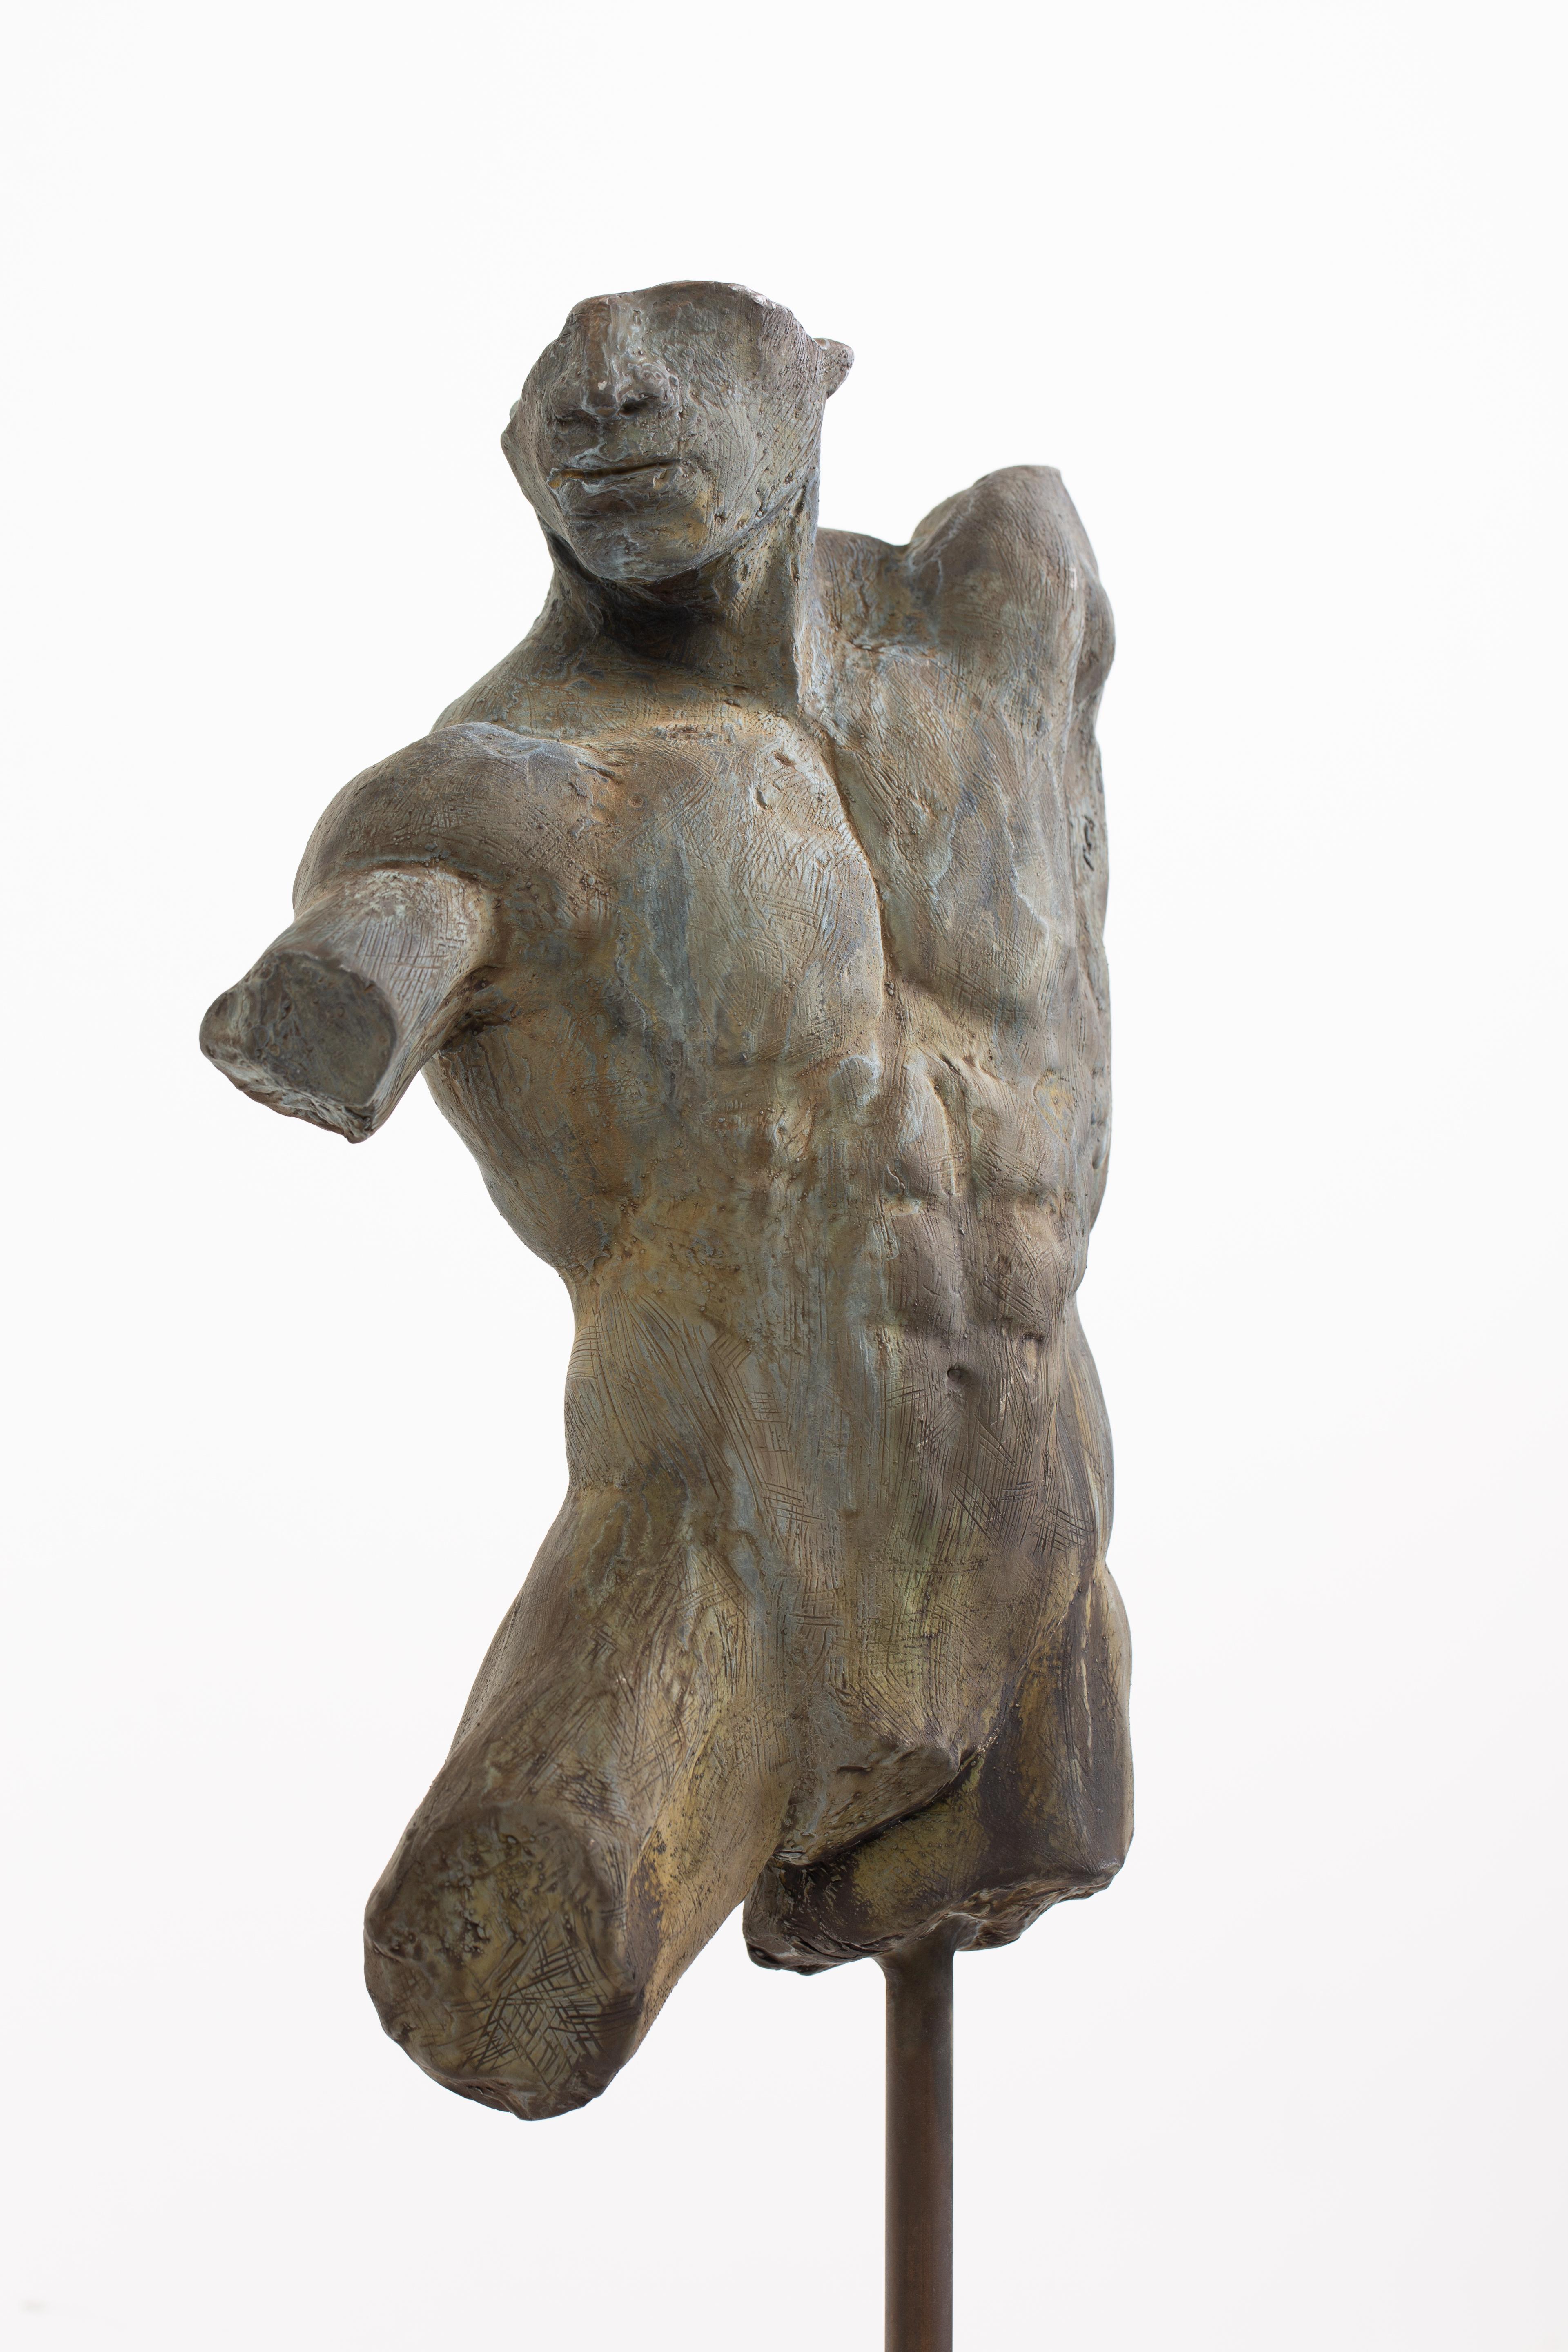 Classical Greek Iron Relic, Classical Male Nude Torso Fragment Sculpted in Bronze